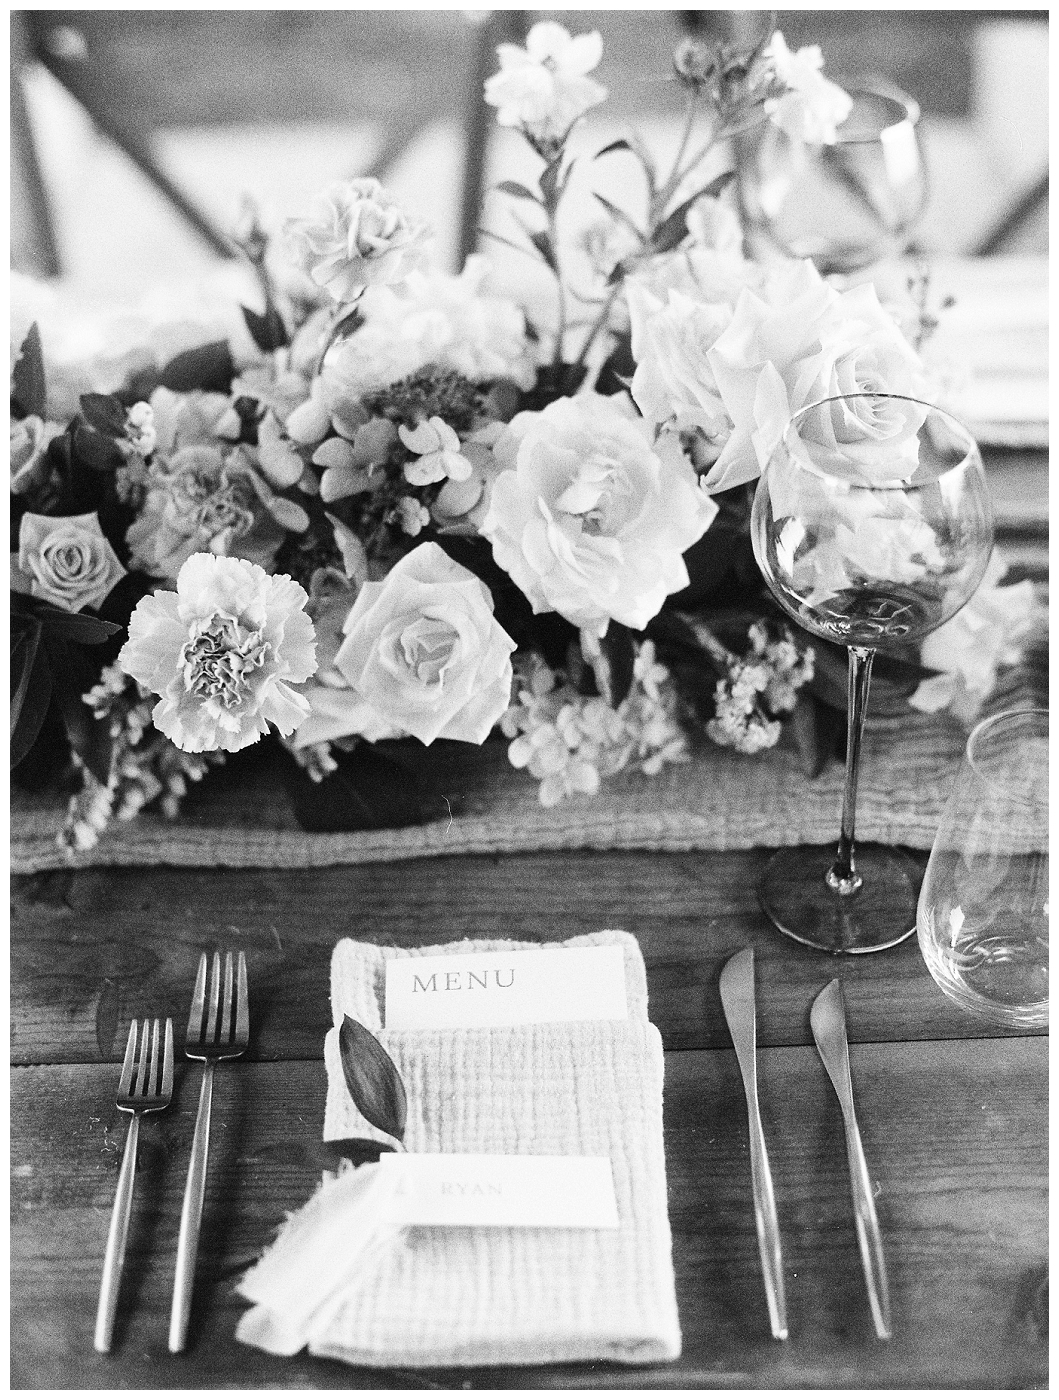 black and white photo of reception table place setting, del mar surf station, farmhouse table, budvases ,outdoor reception, medium sized centerpieces, romantic weddings, daisies, toffee roses, berries, cream flowers, white flowers, hydrangeas, majolica roses, explosion grass, outdoor wedding, covid wedding, san diego wedding florist, southern california elopement florist, socal florist, best wedding florist san diego ca, best wedding florist southern california, los angeles wedding florist, top rated wedding florist in california, del mar san diego, blush tapered candles, blush table runner, budvases